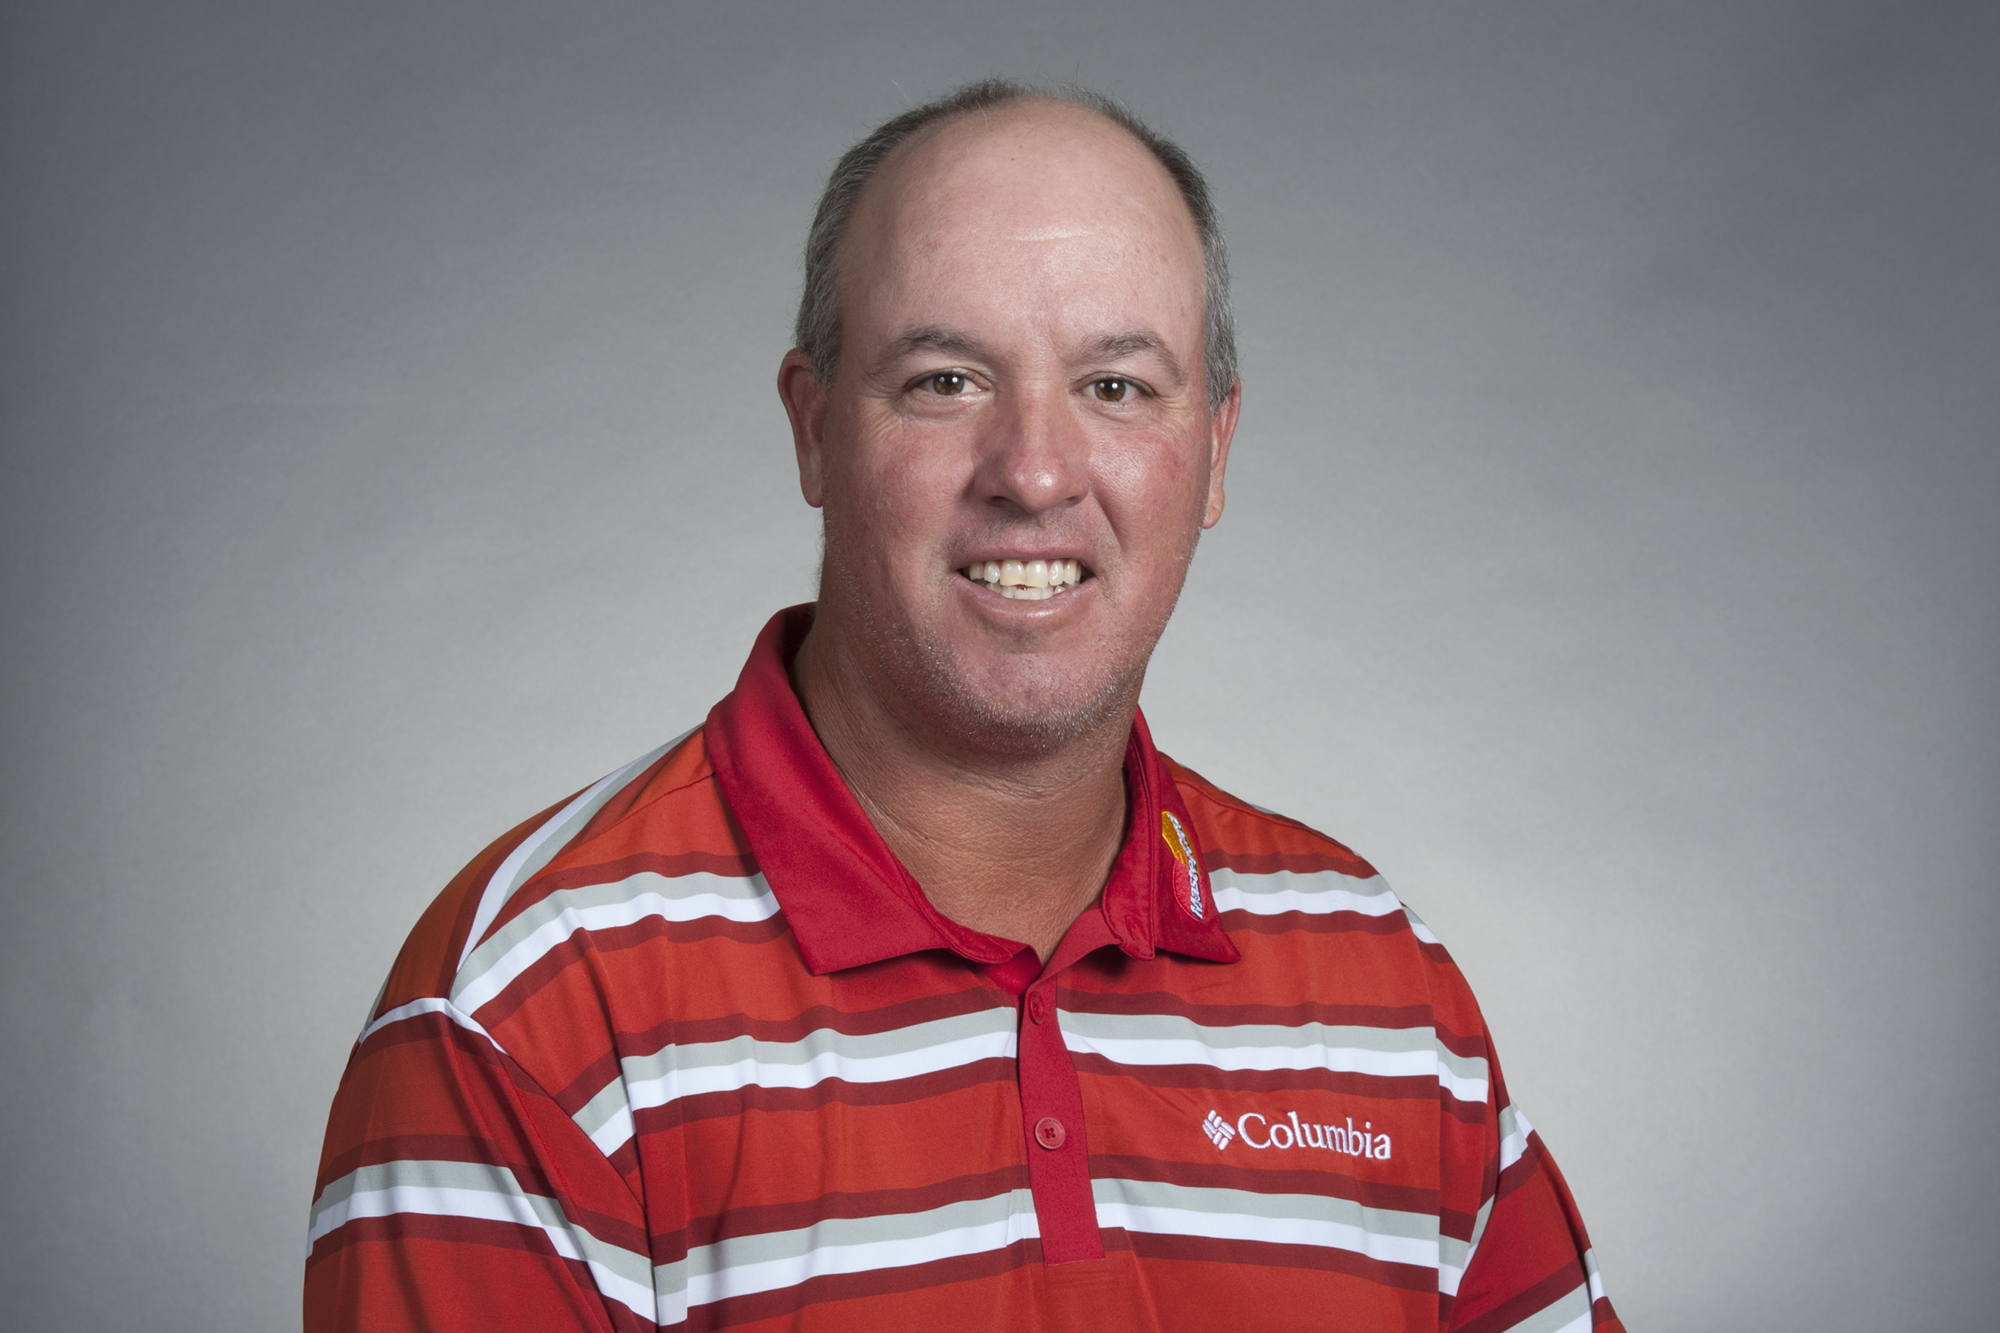 9. Former PGA Tour player Boo Weekley is playing on his first tour since 2017 because of tendinitis. Photo courtesy PGA Tour Media.